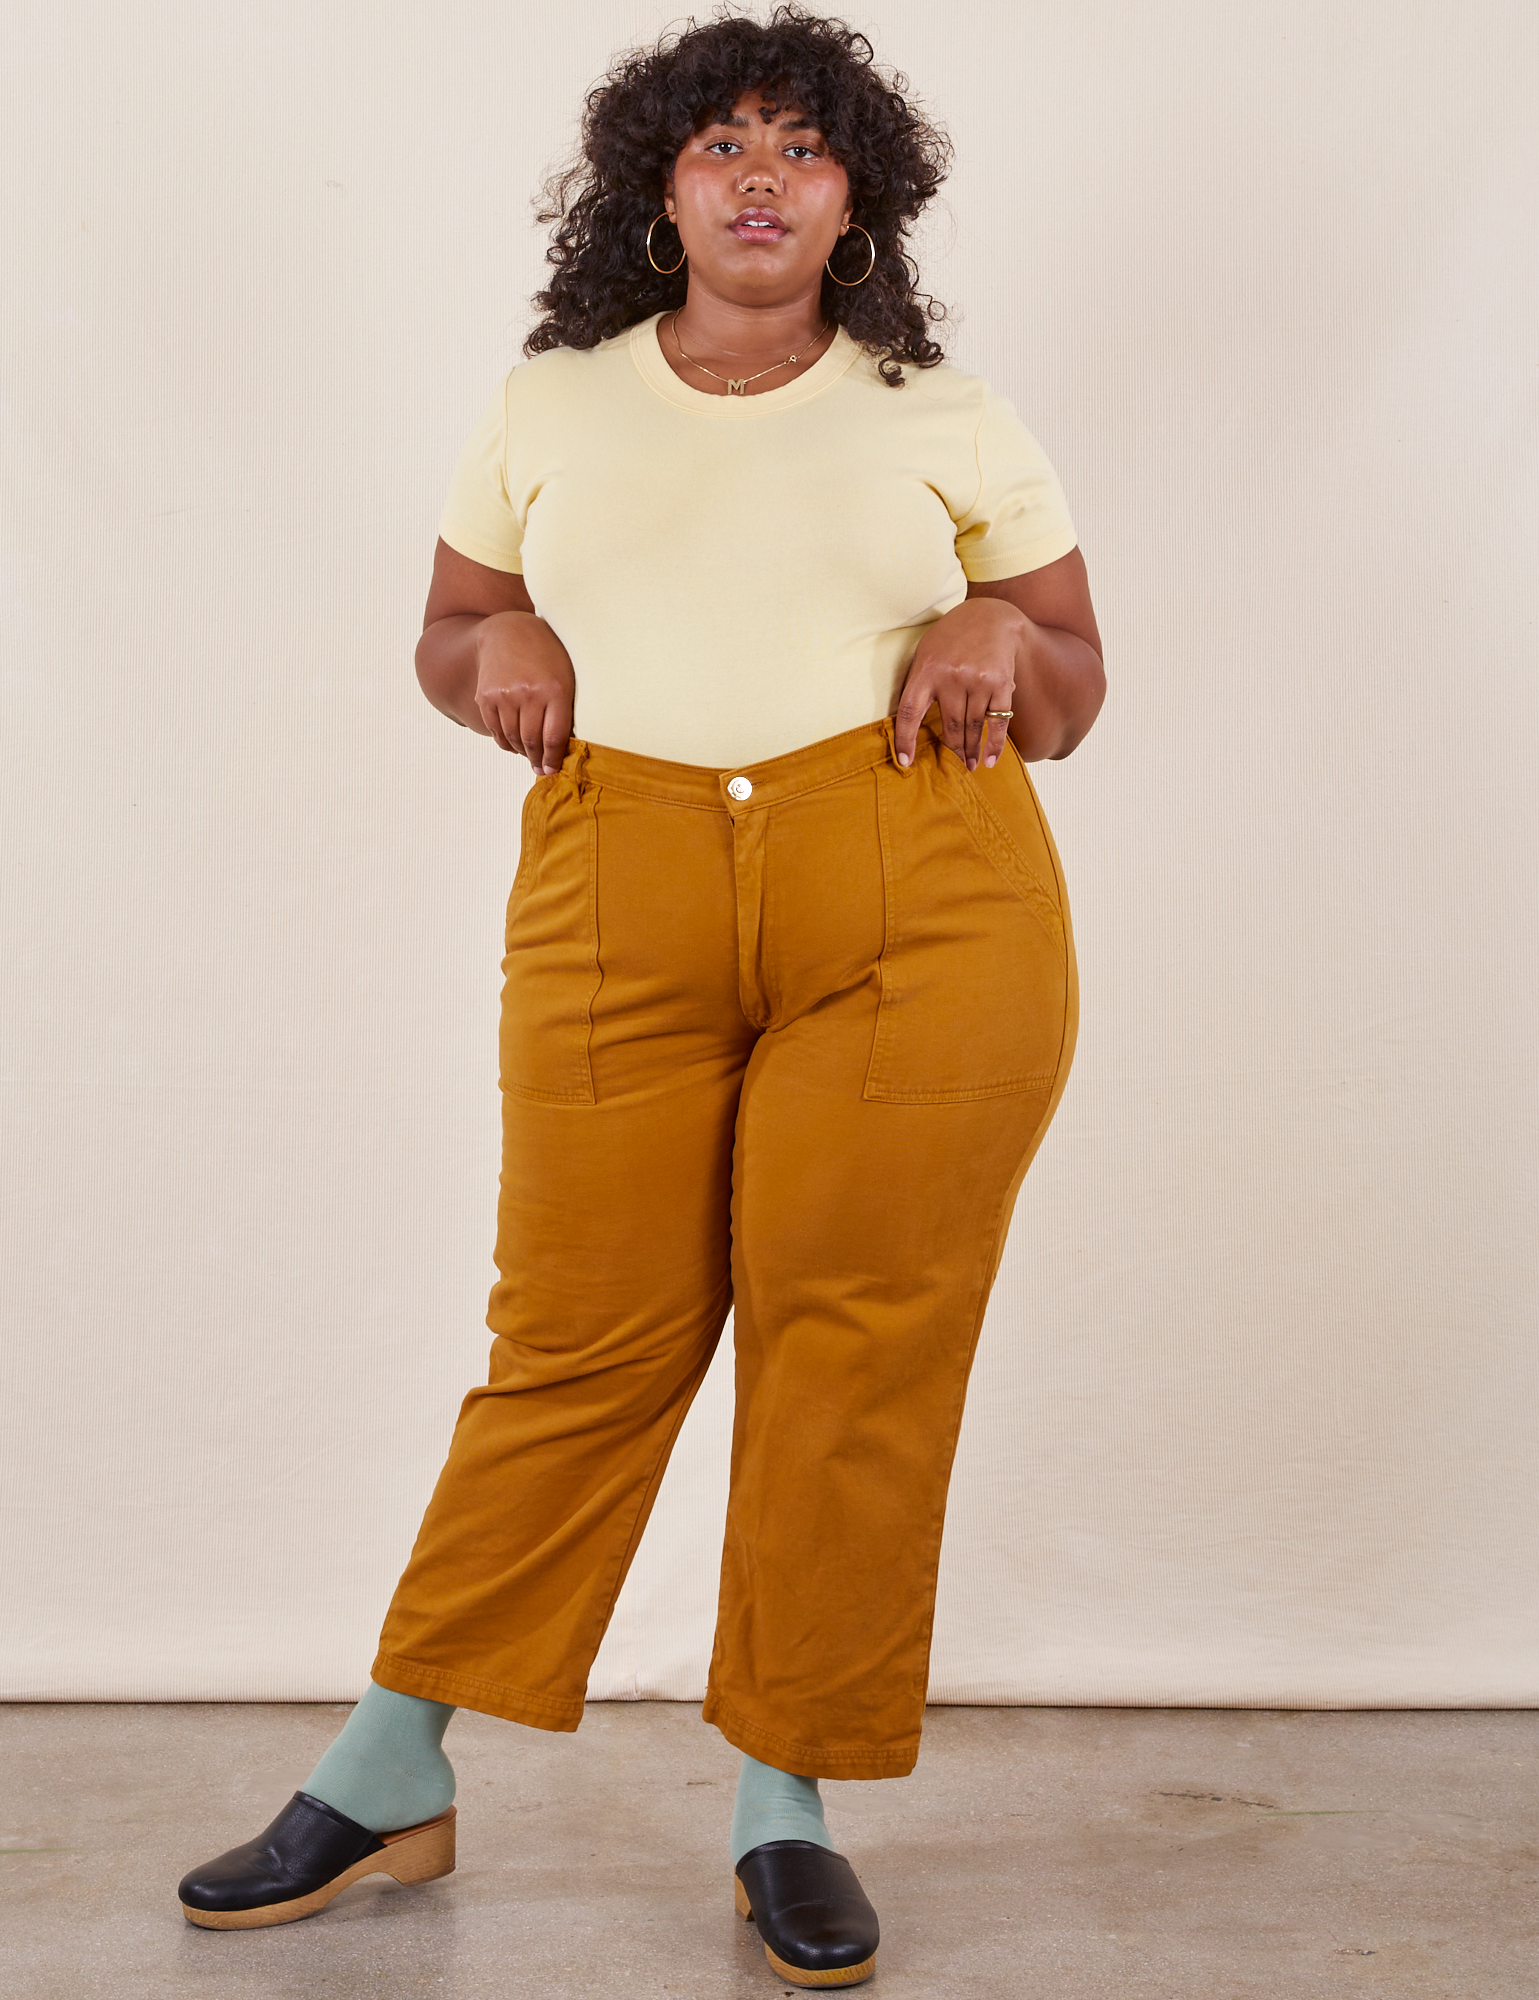 Morgan is 5&#39;5&quot; and wearing Petite 1XL Work Pants in Spicy Mustard paired with butter yellow Baby Tee